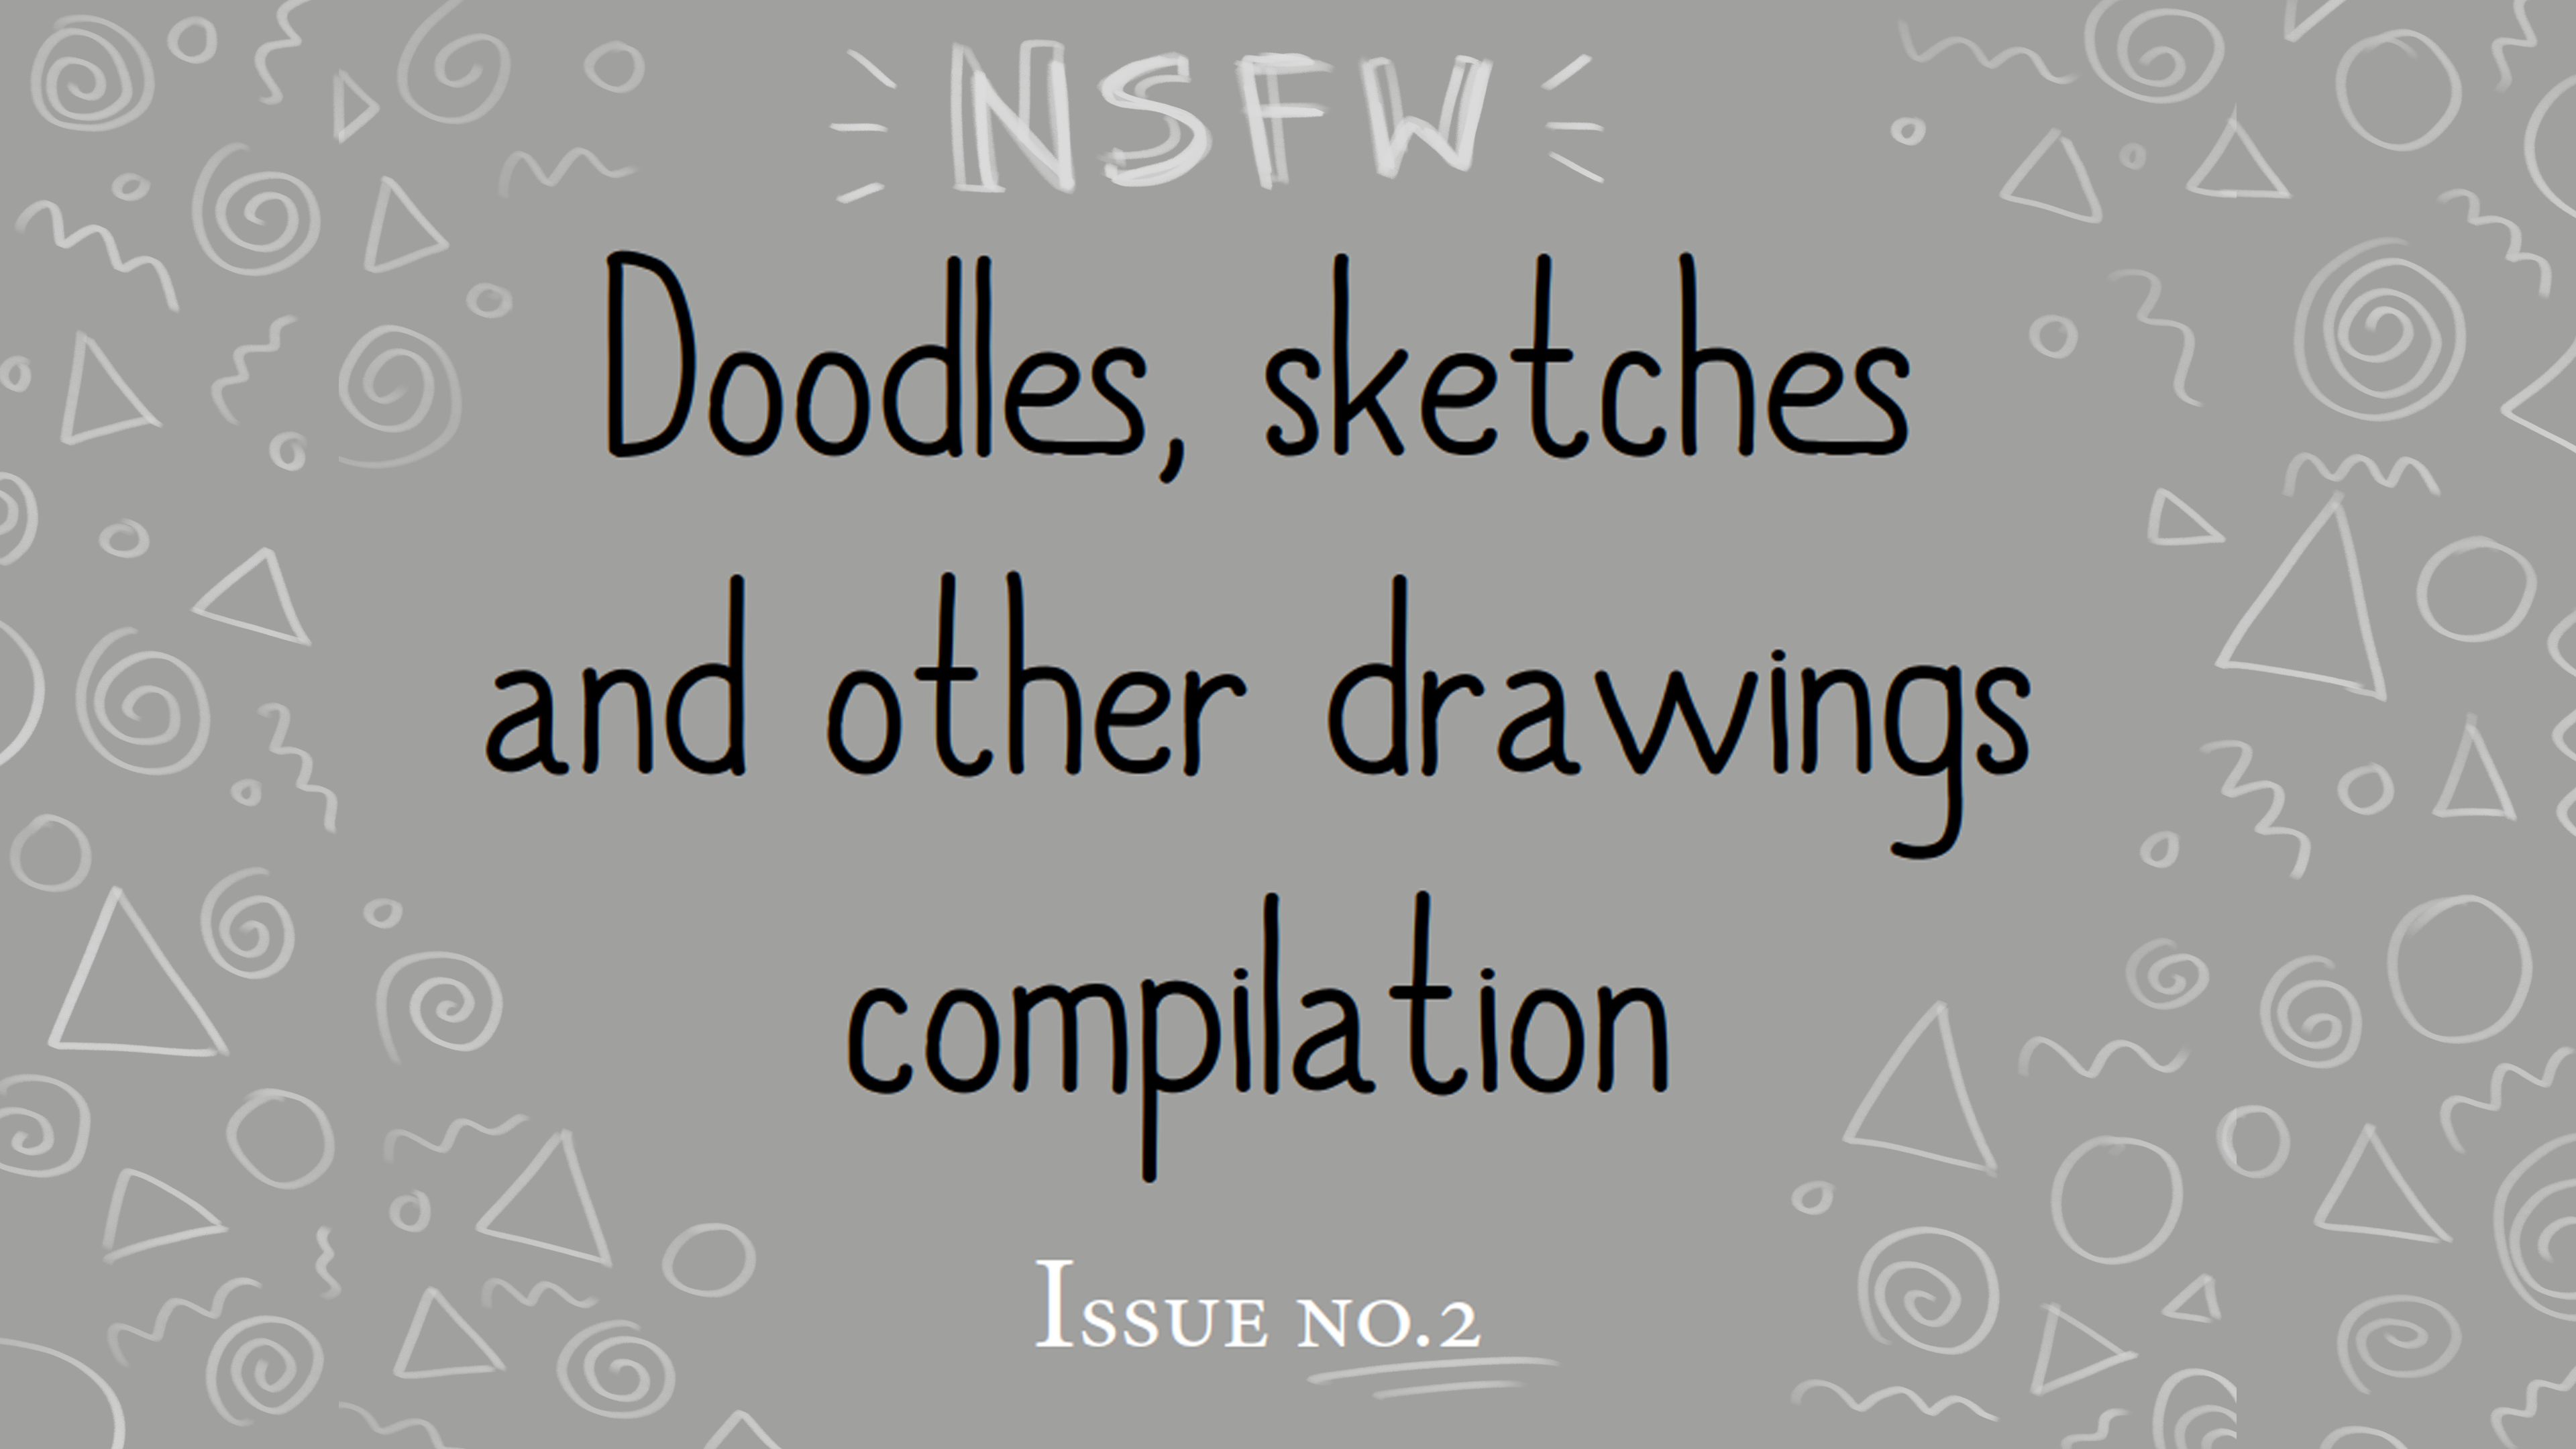 Doodles, sketches and other art compilation #2